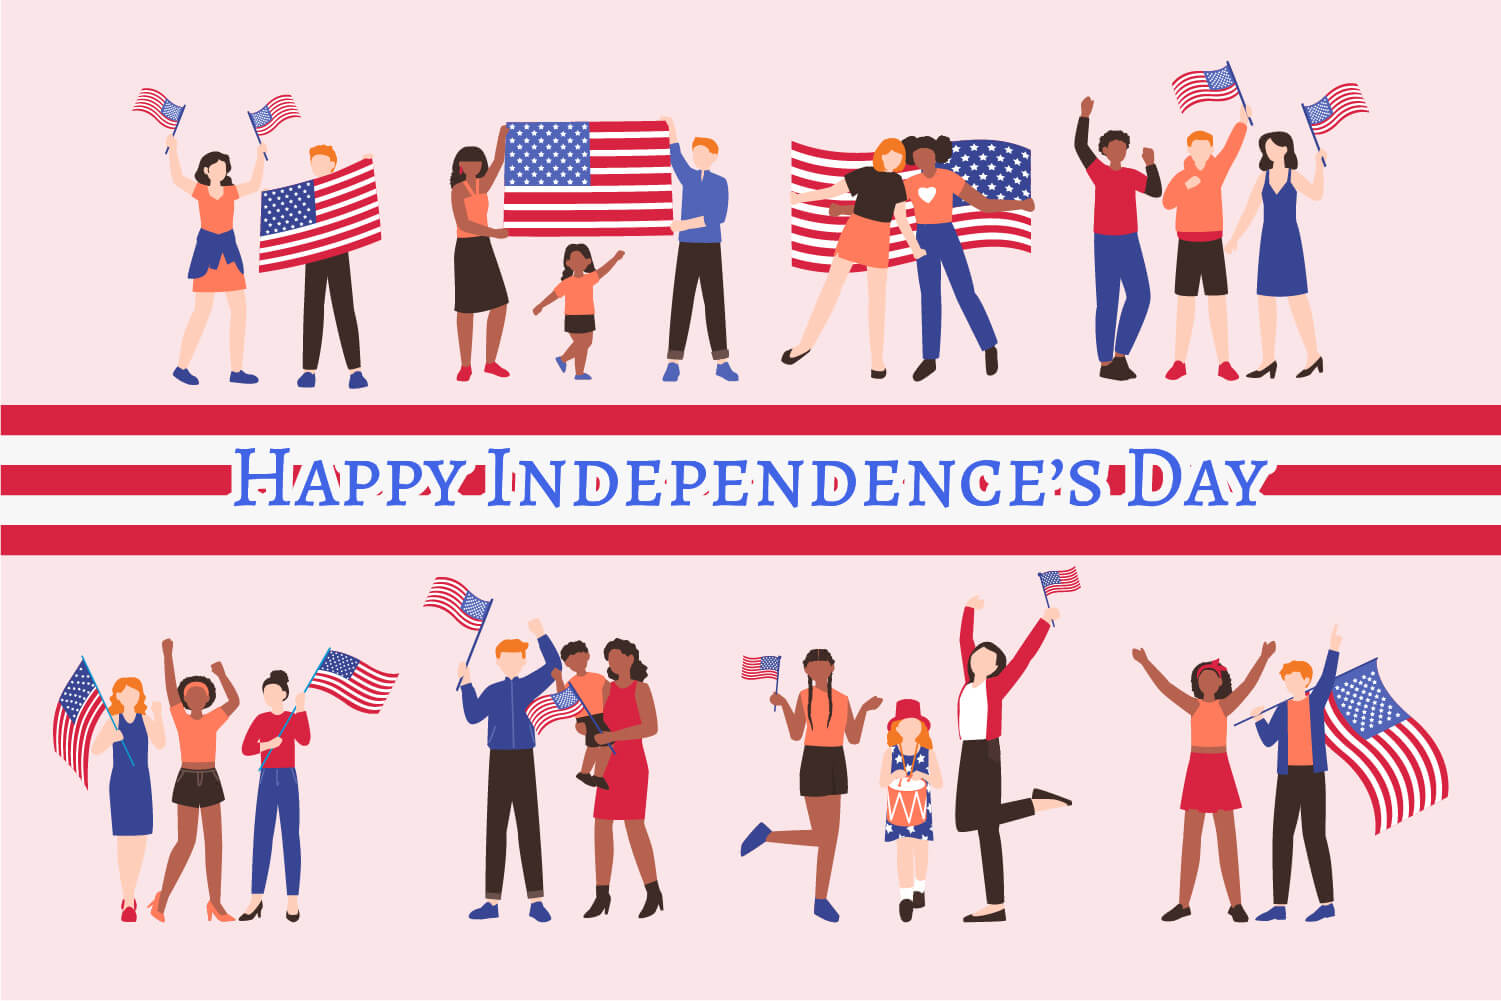  of Independence Day celebration symbolizing American flags and American youth. Cliparts printable PDF